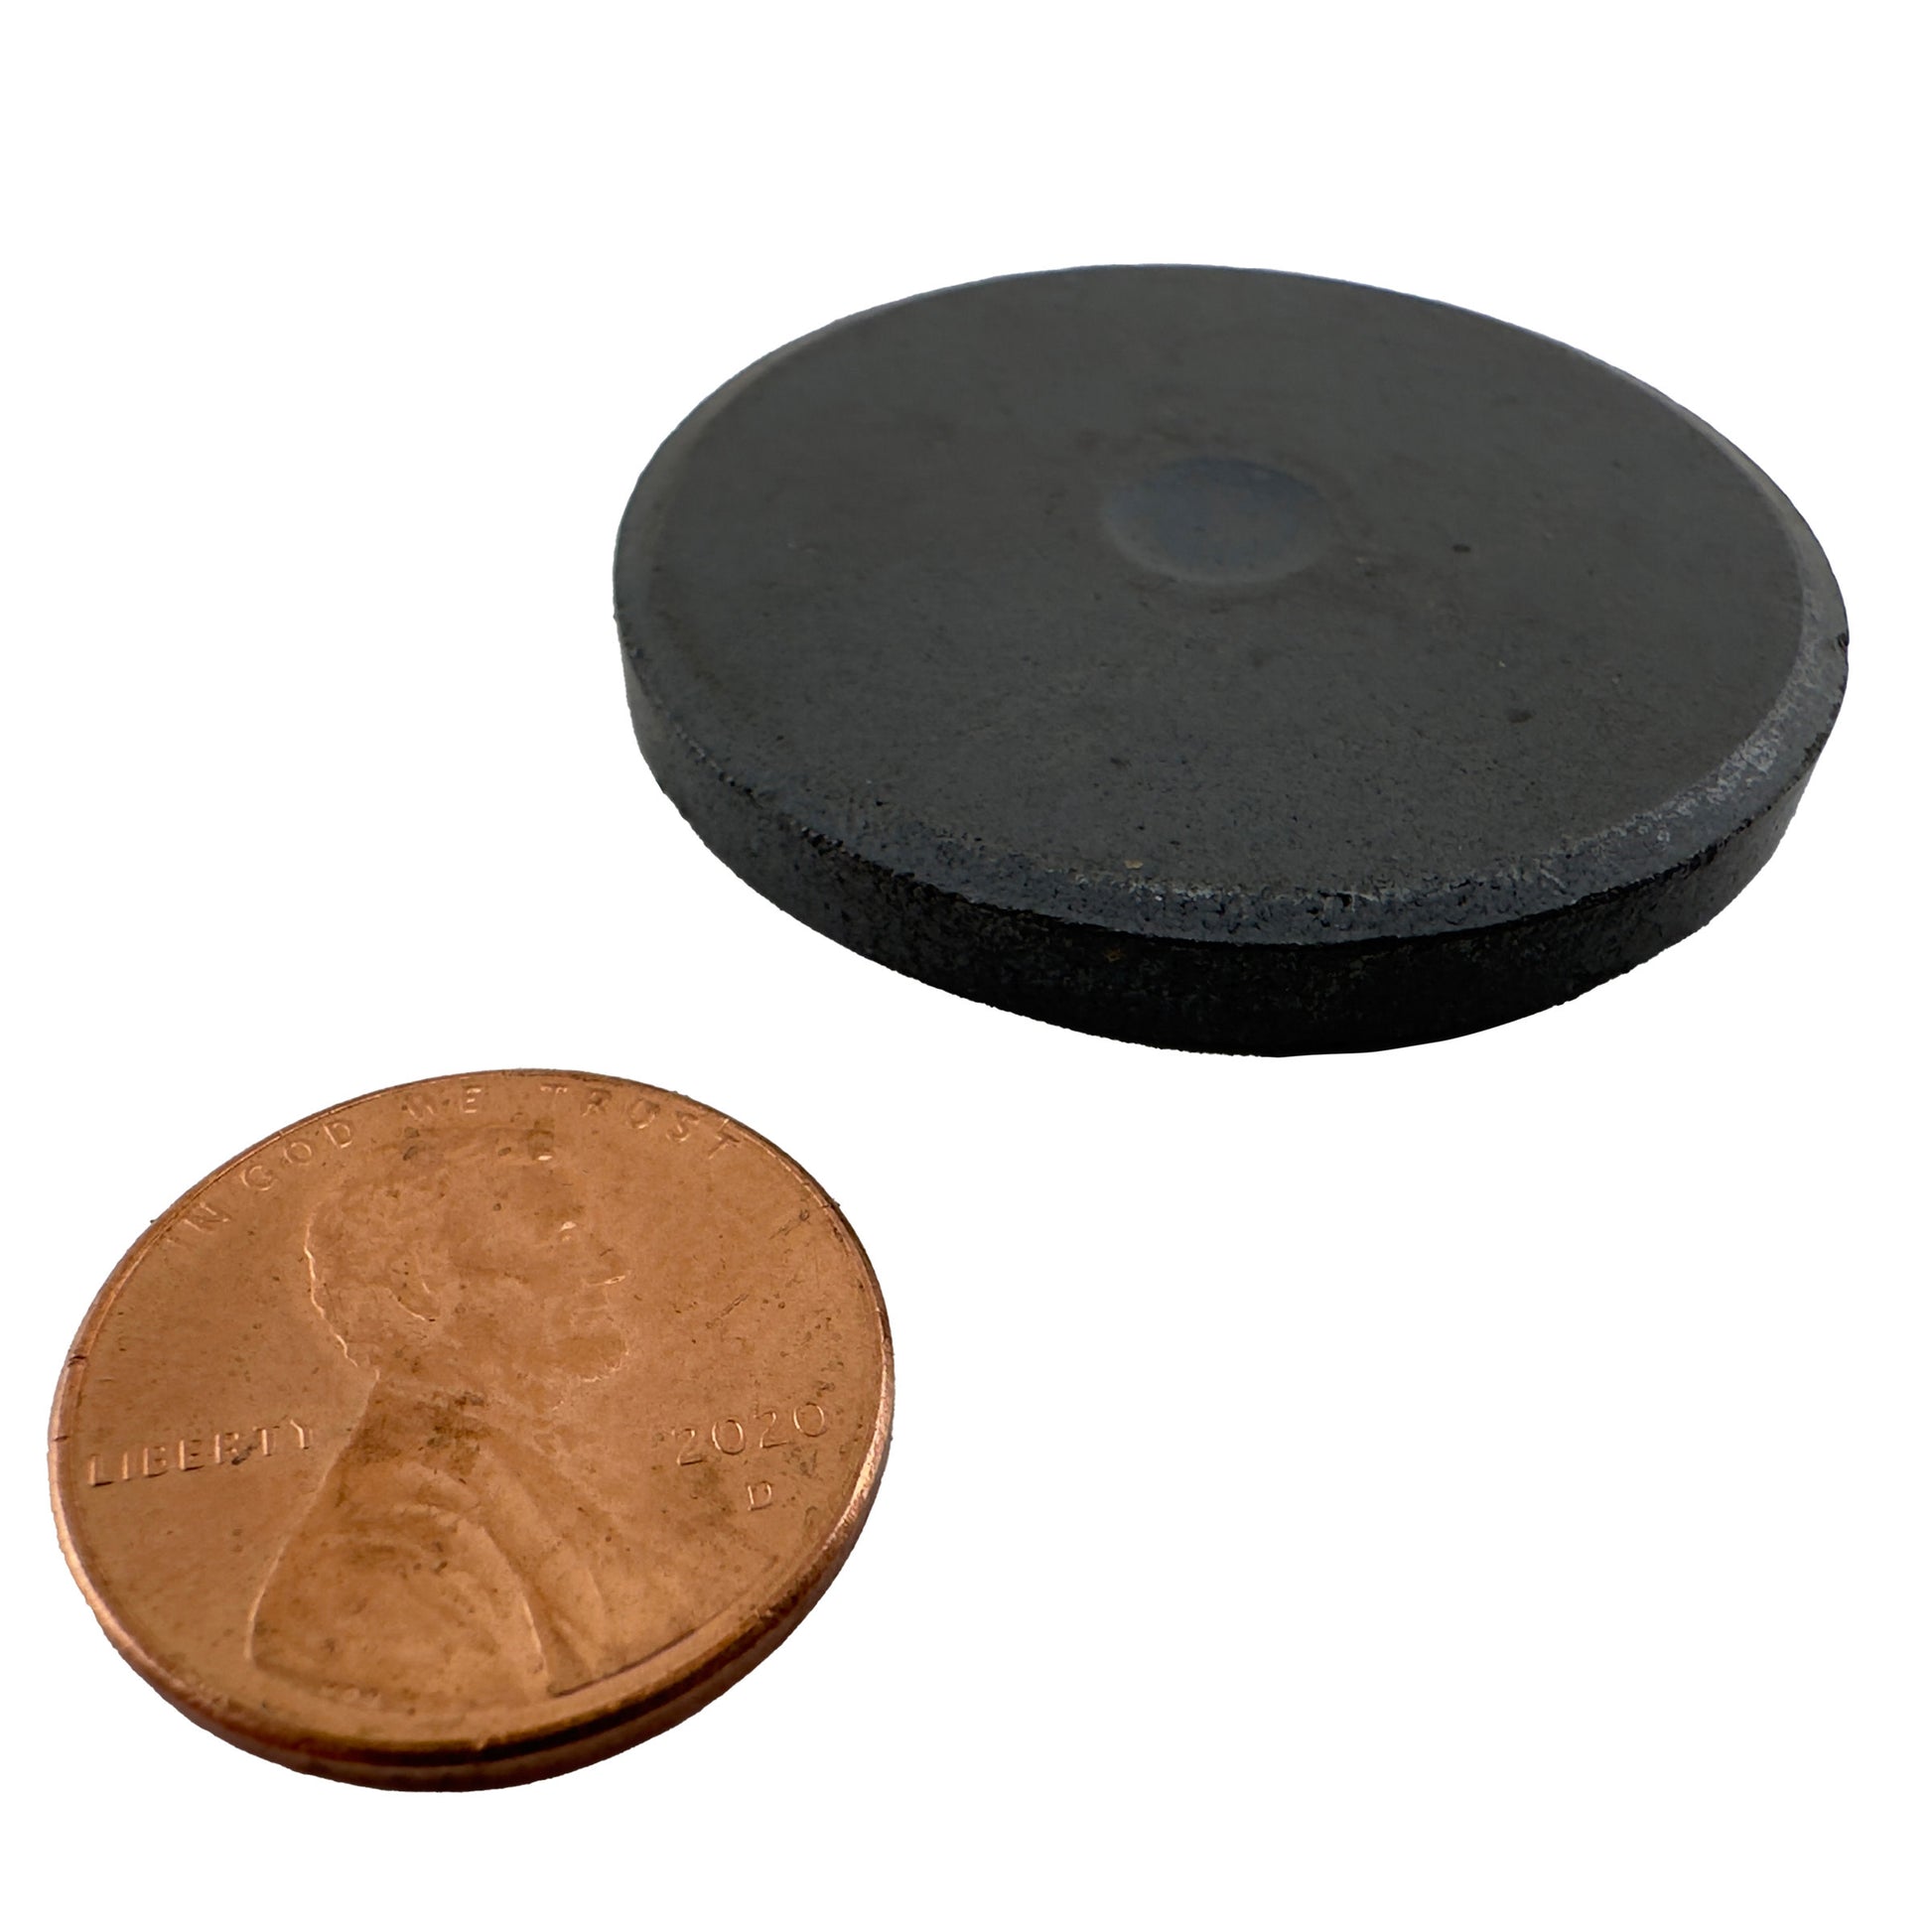 Load image into Gallery viewer, 07041 Ceramic Disc Magnets (2pk) - 45 Degree Angle View